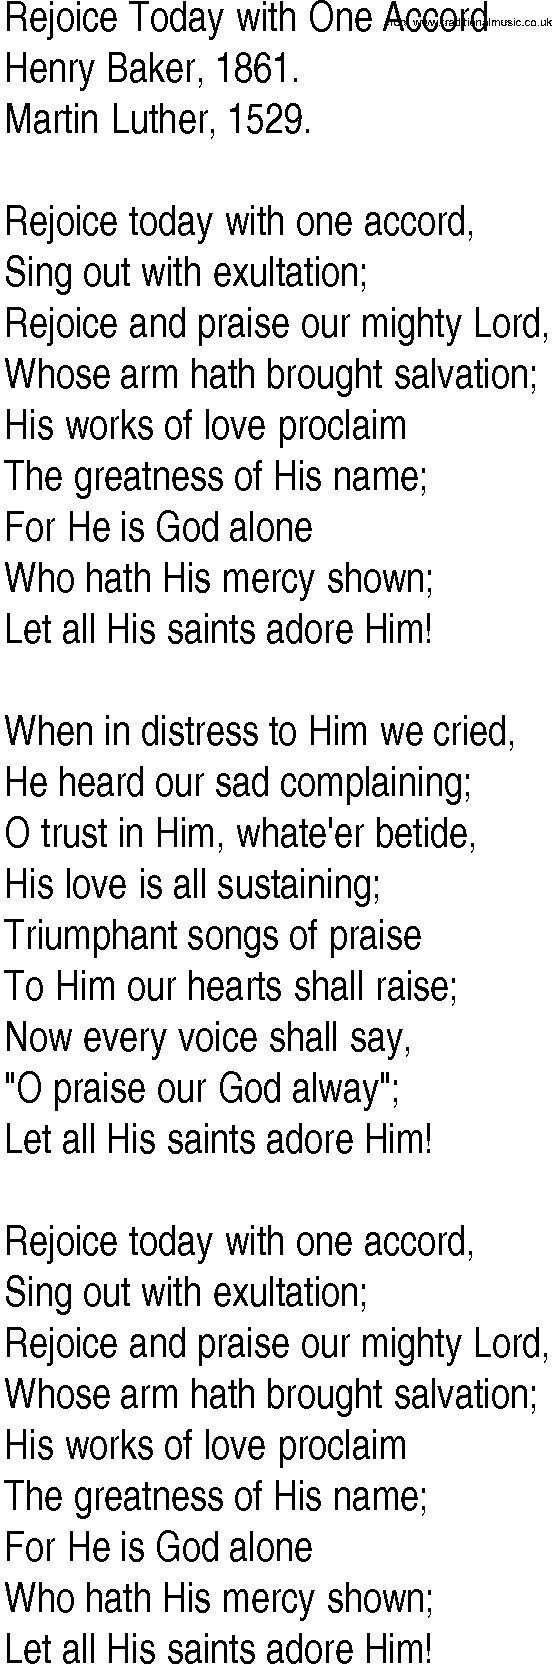 Hymn and Gospel Song: Rejoice Today with One Accord by Henry Baker lyrics